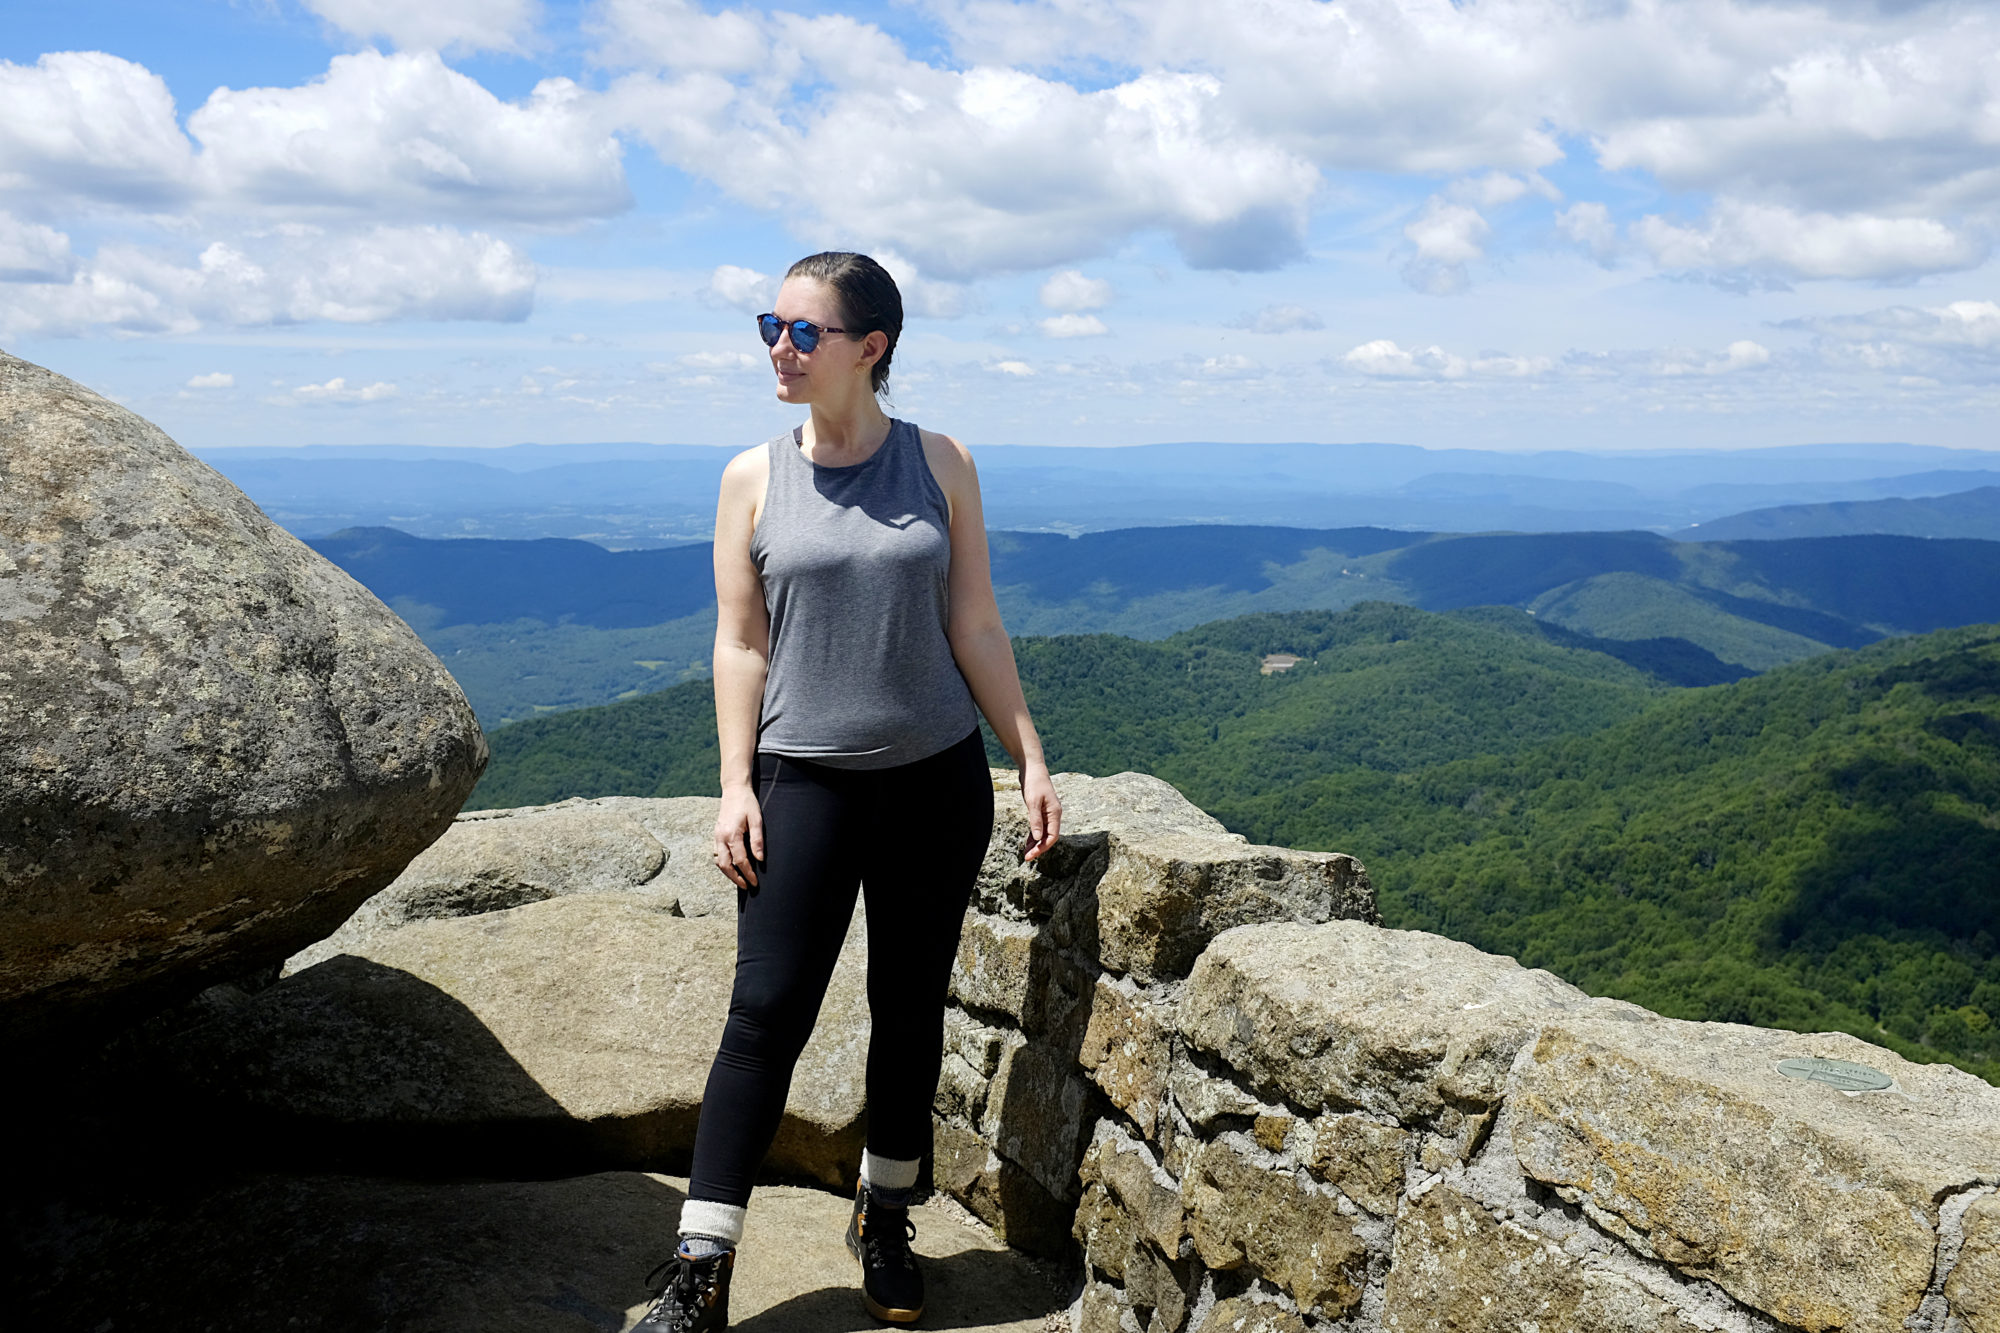 Alyssa stands at the summit of Sharp Top